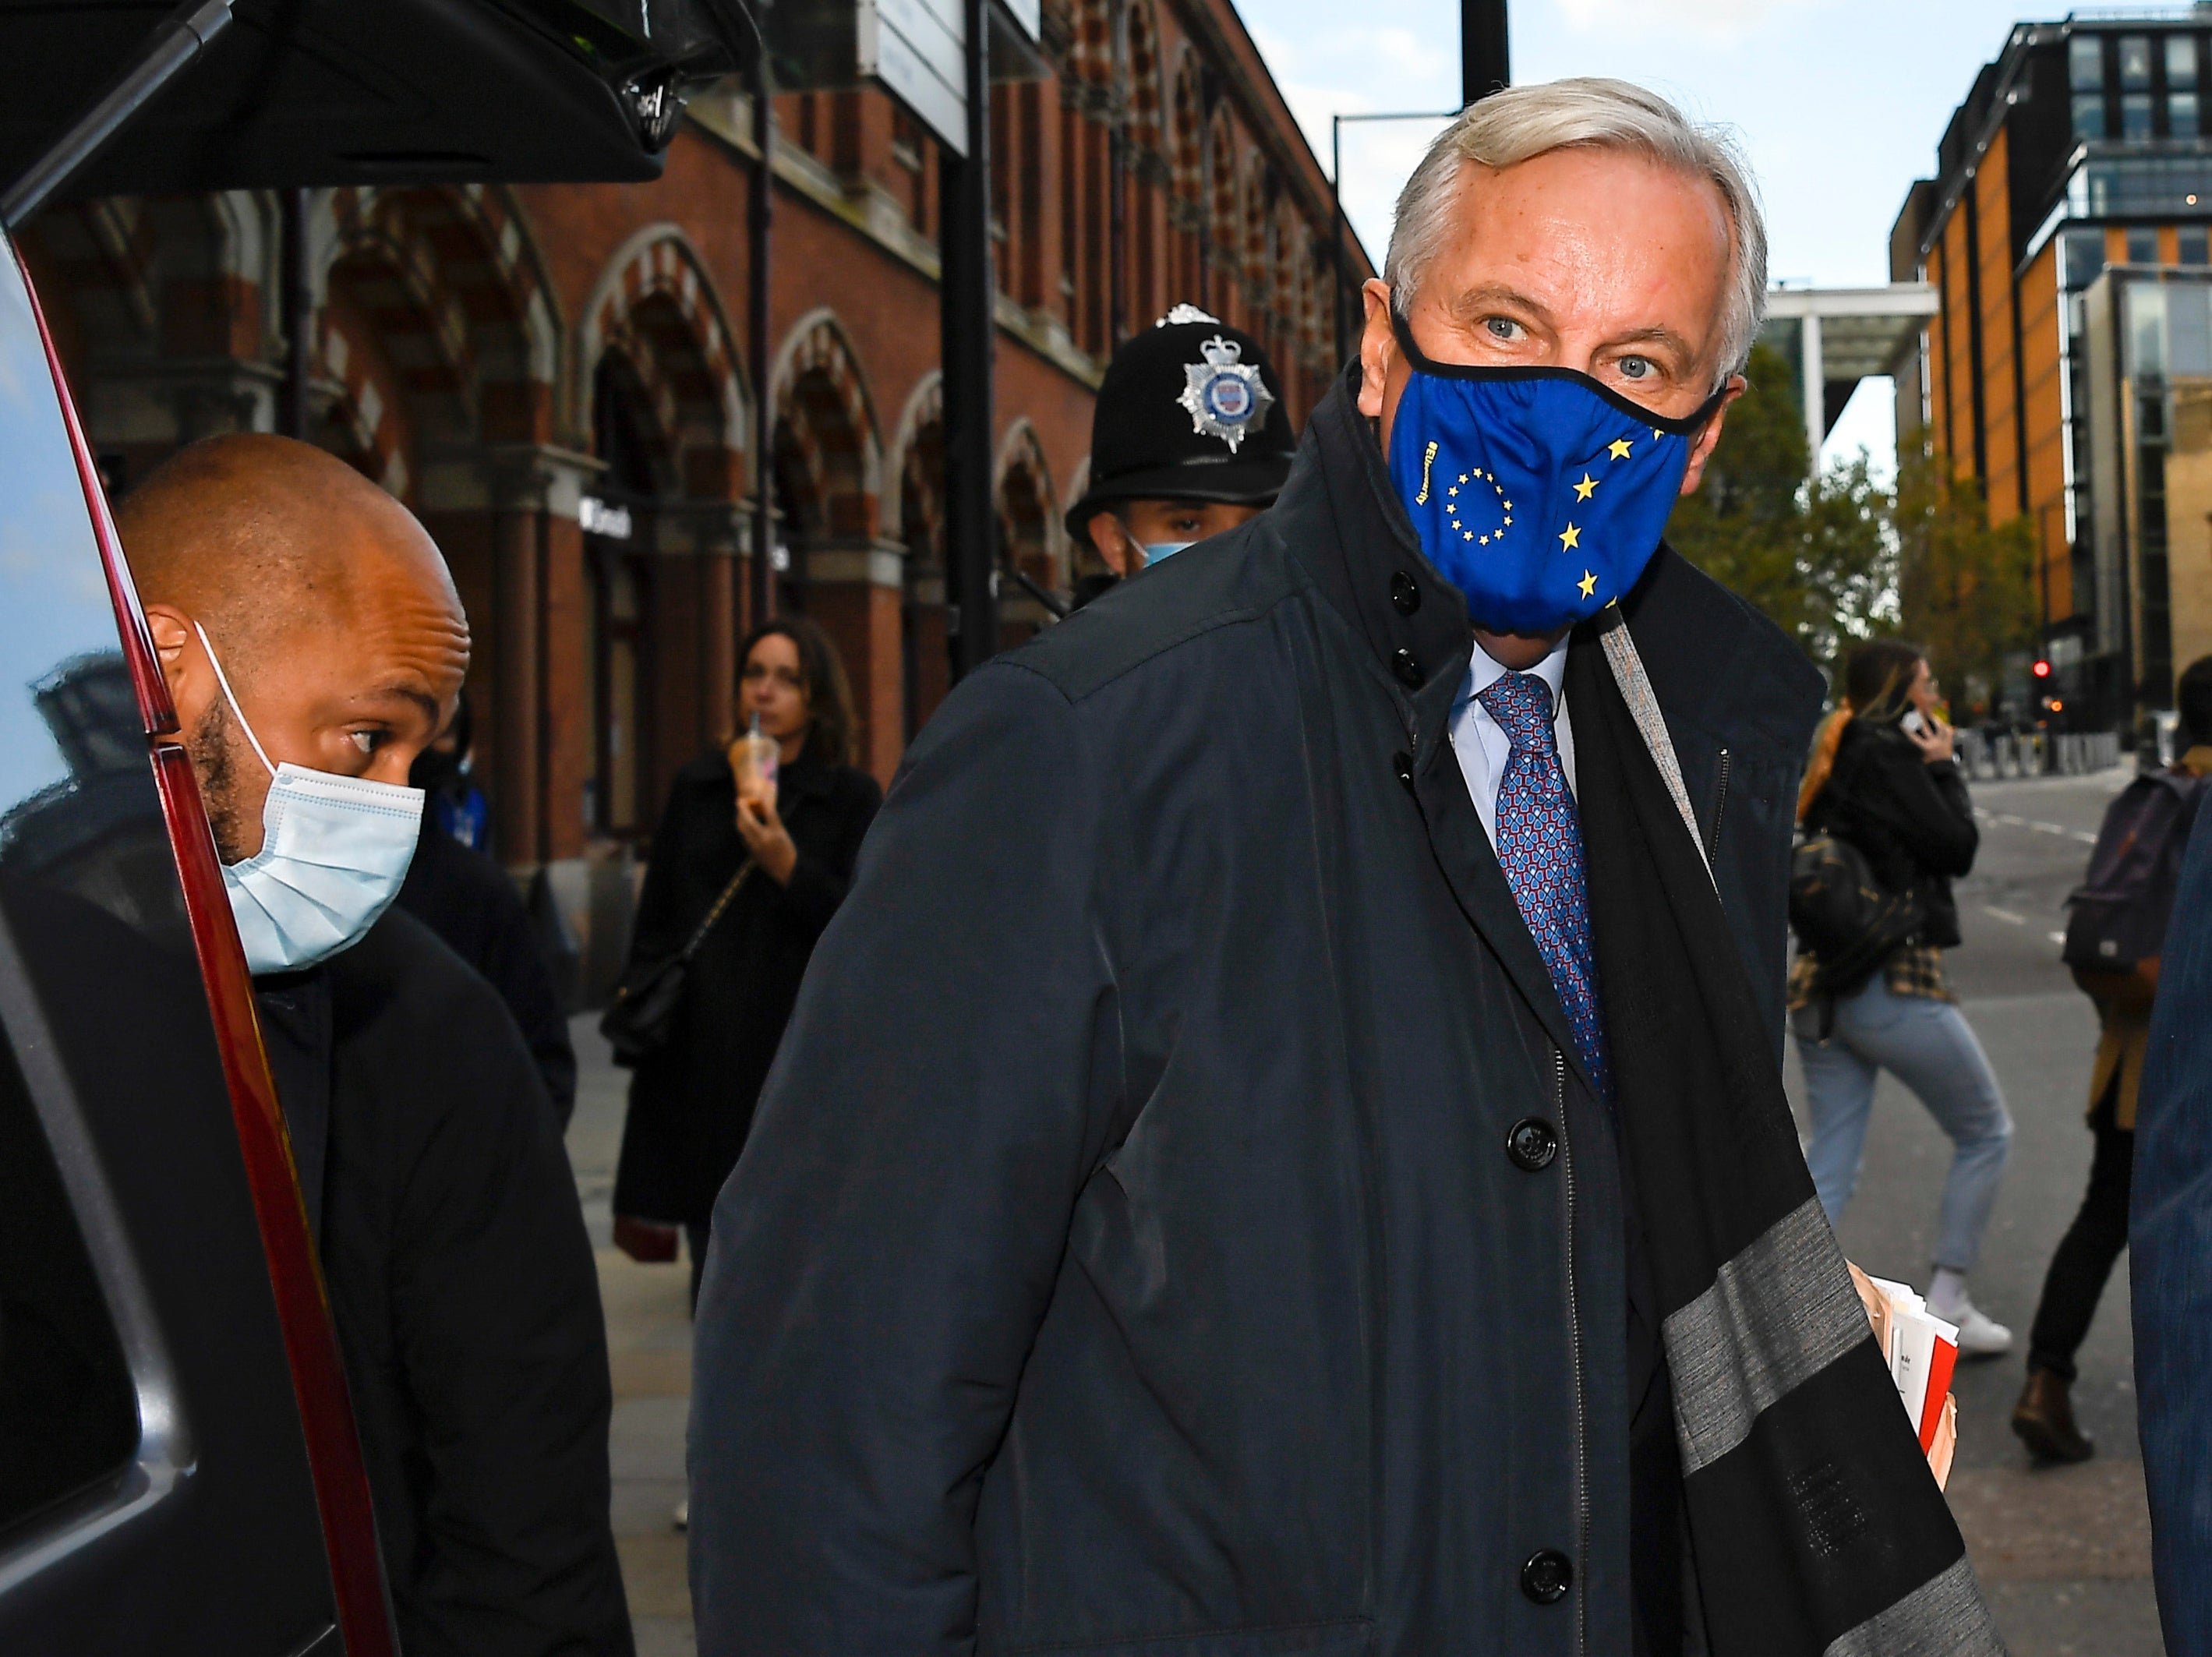 EU Chief negotiator Michel Barnier wears a face mask as he arrives at St Pancras station